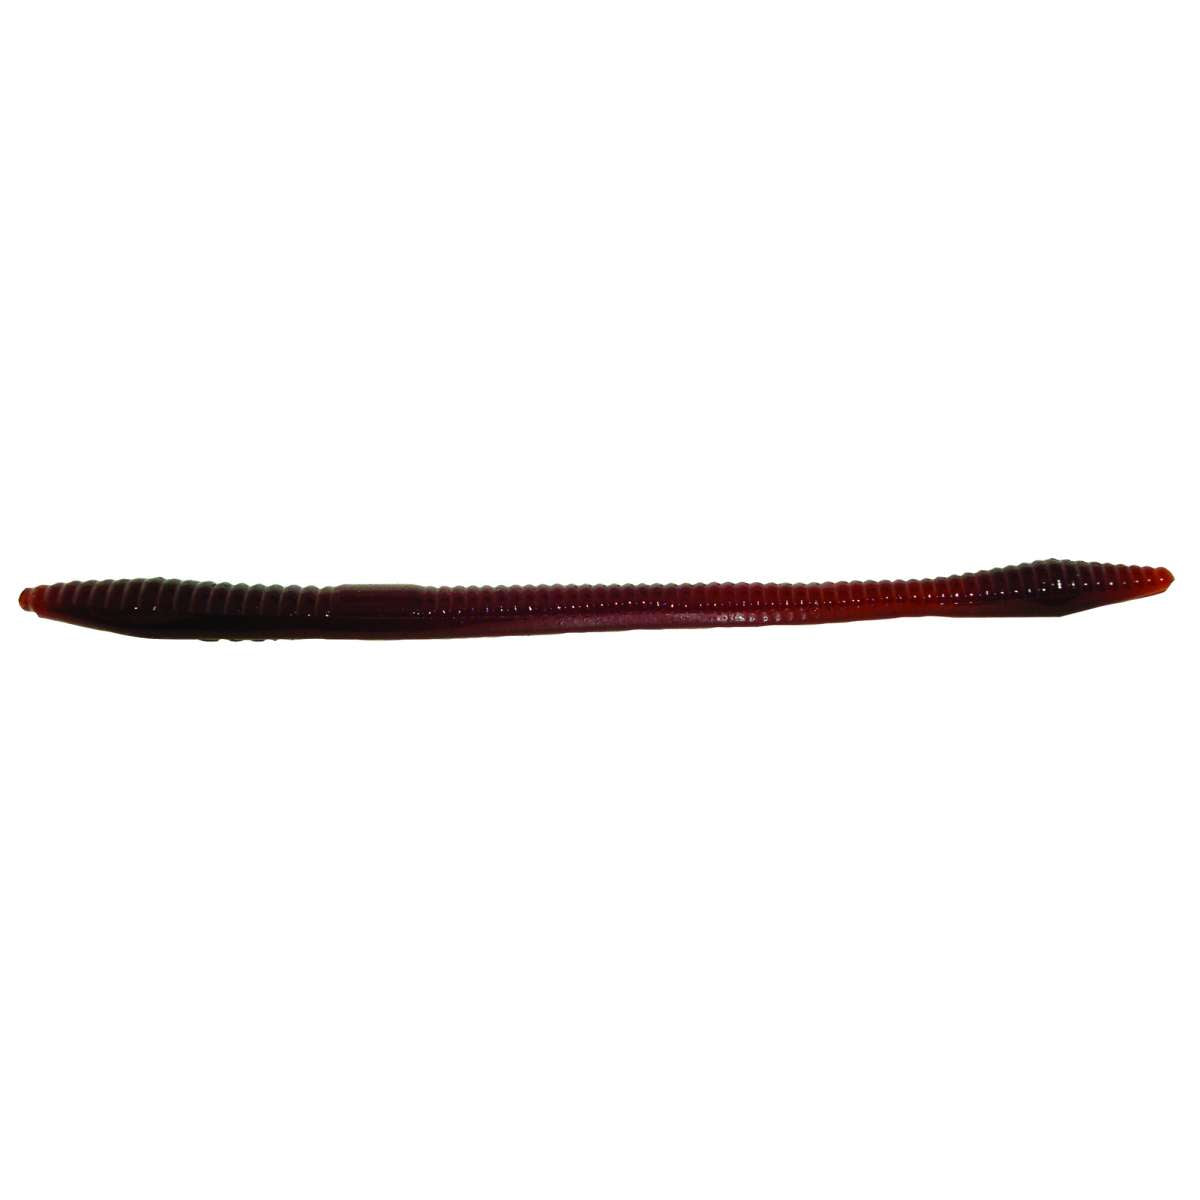 Eurotackle Mummy Worm Preserved Wax Worms - Red